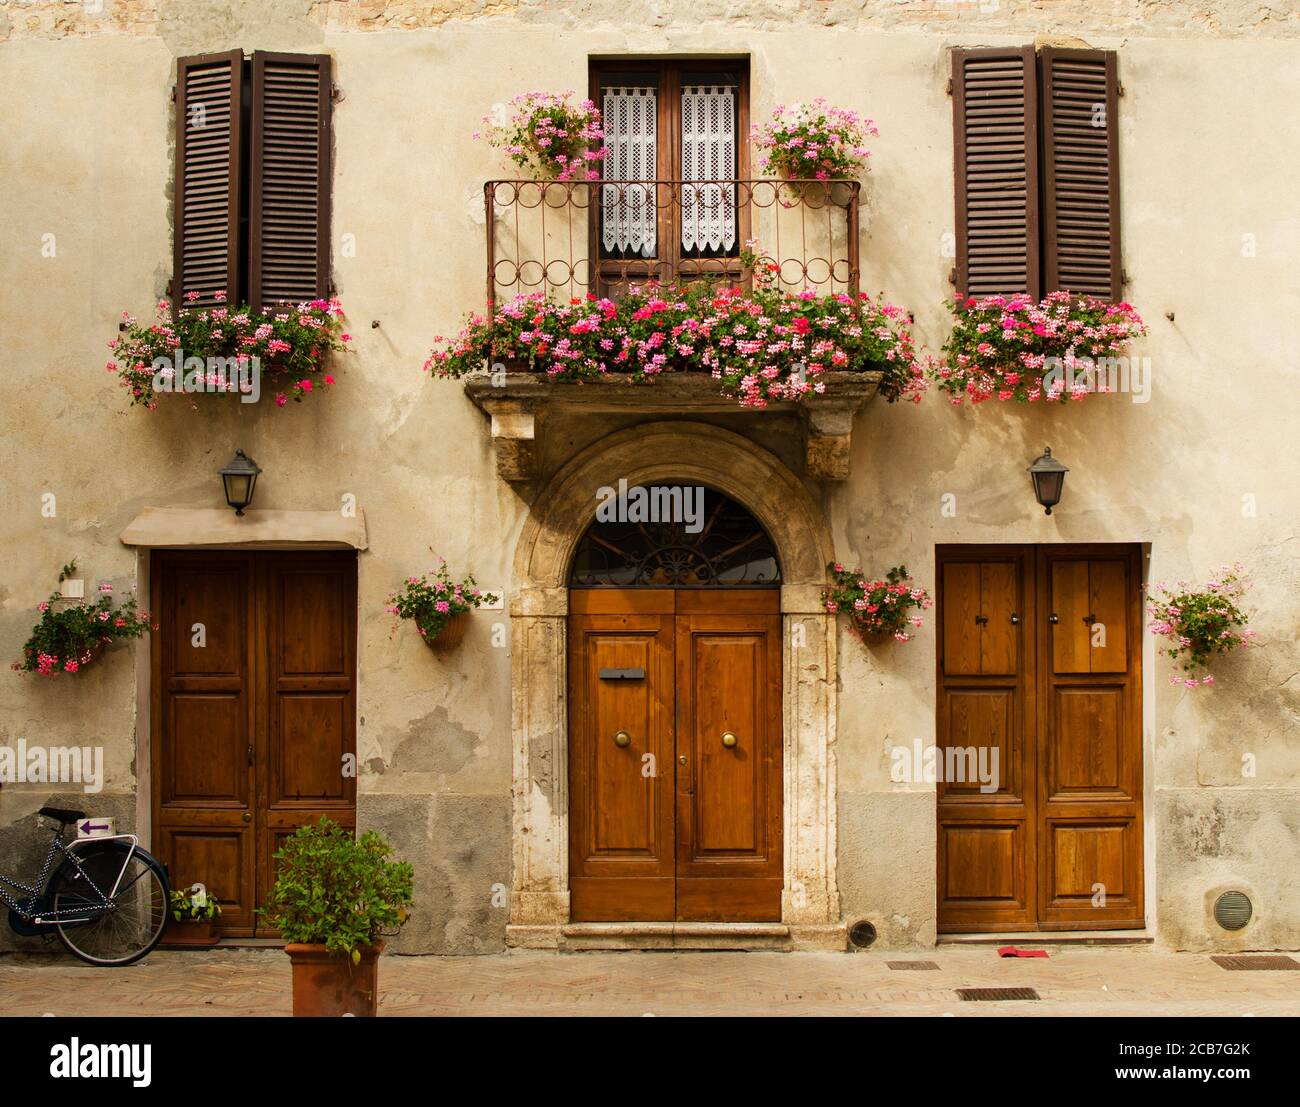 Facade of old house in Pienza with windows, balcony with flowers ...